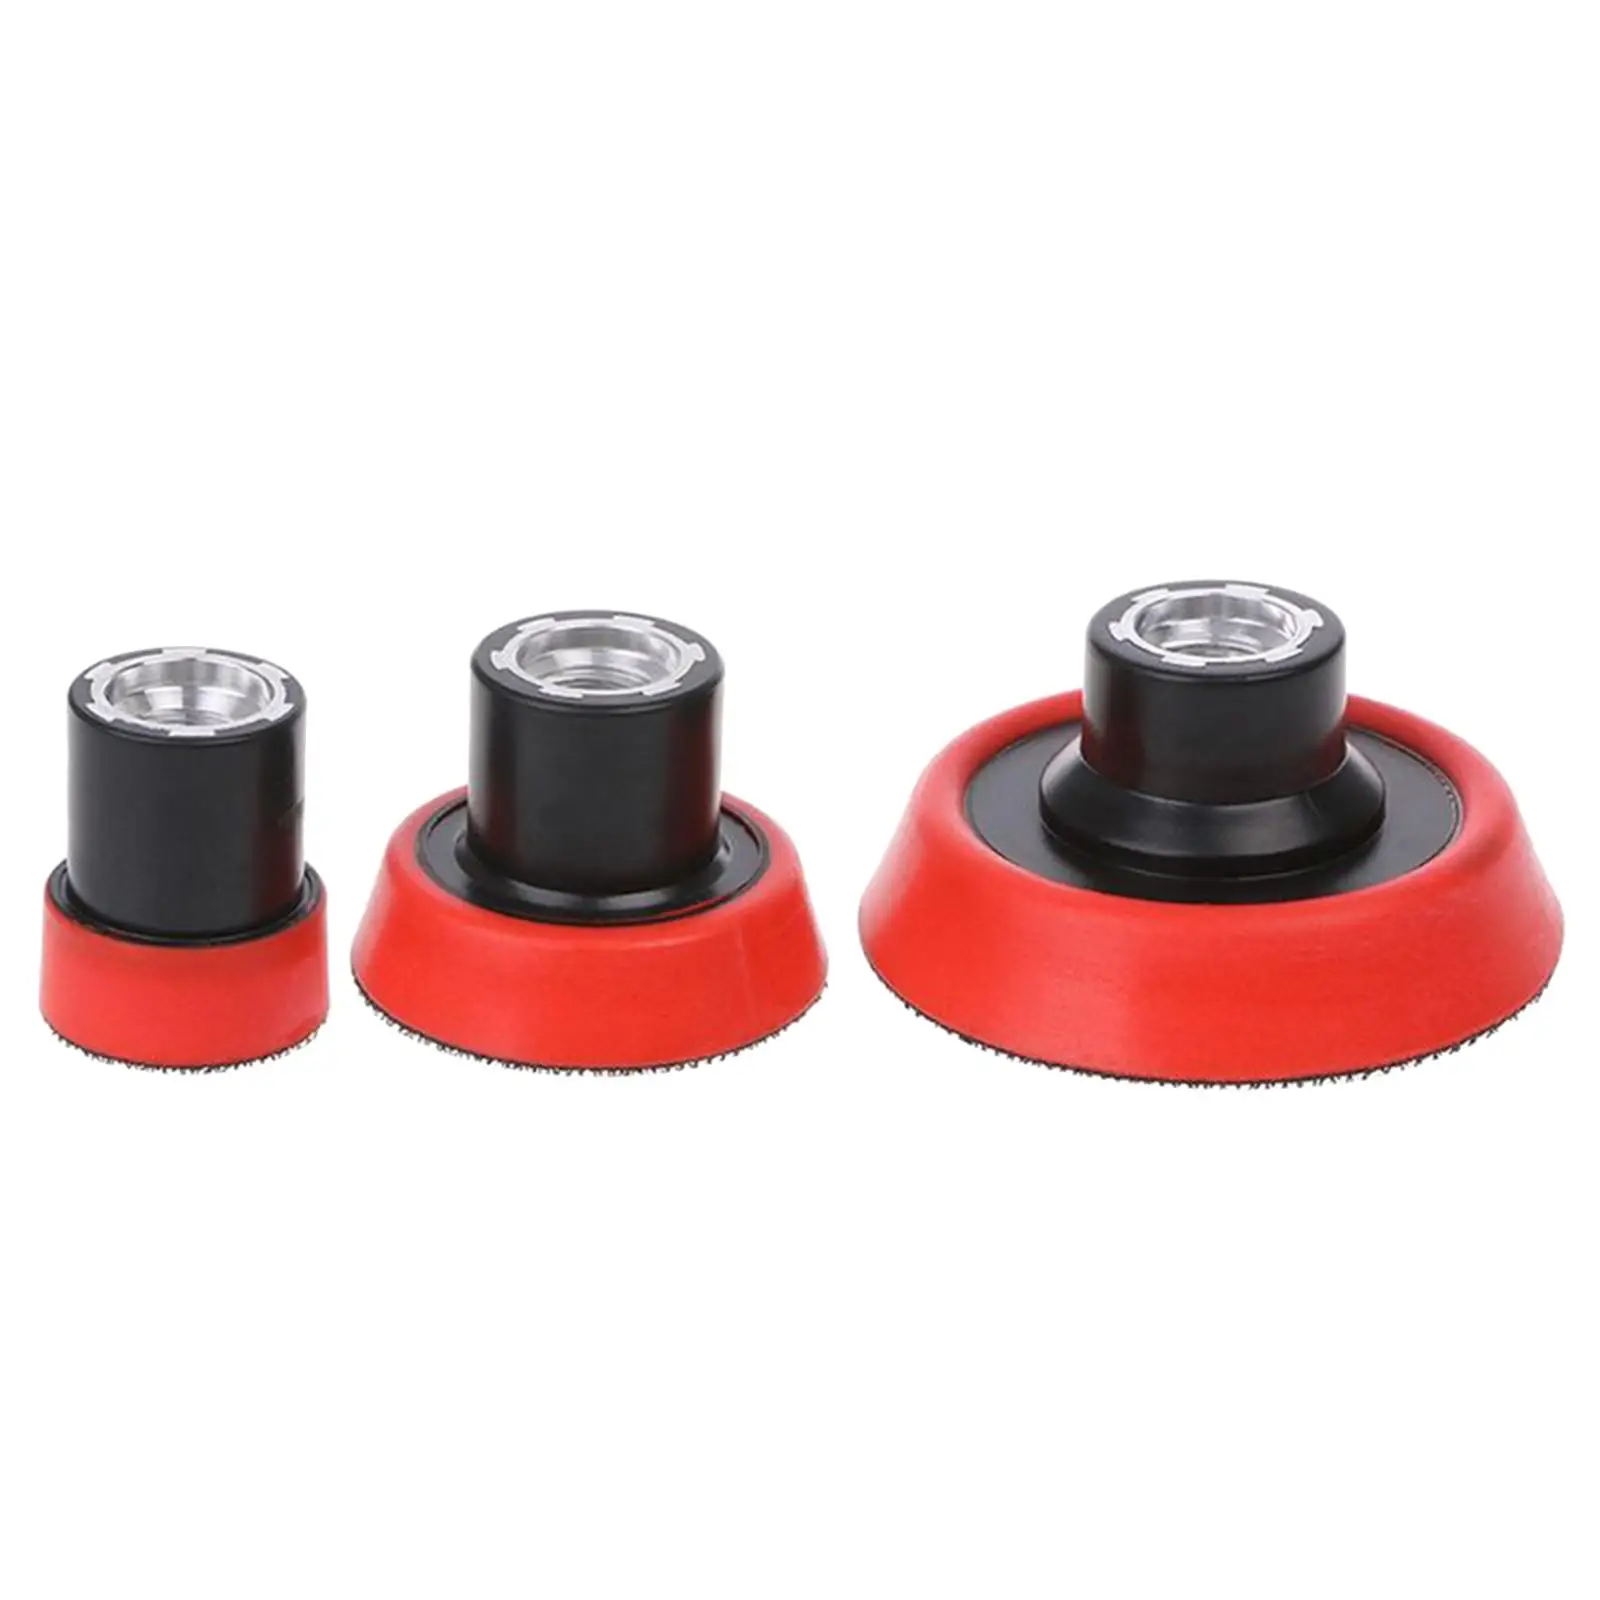 3 Pieces Backing   Accs Buffering Backer Set Tools Durable M10 Polisher